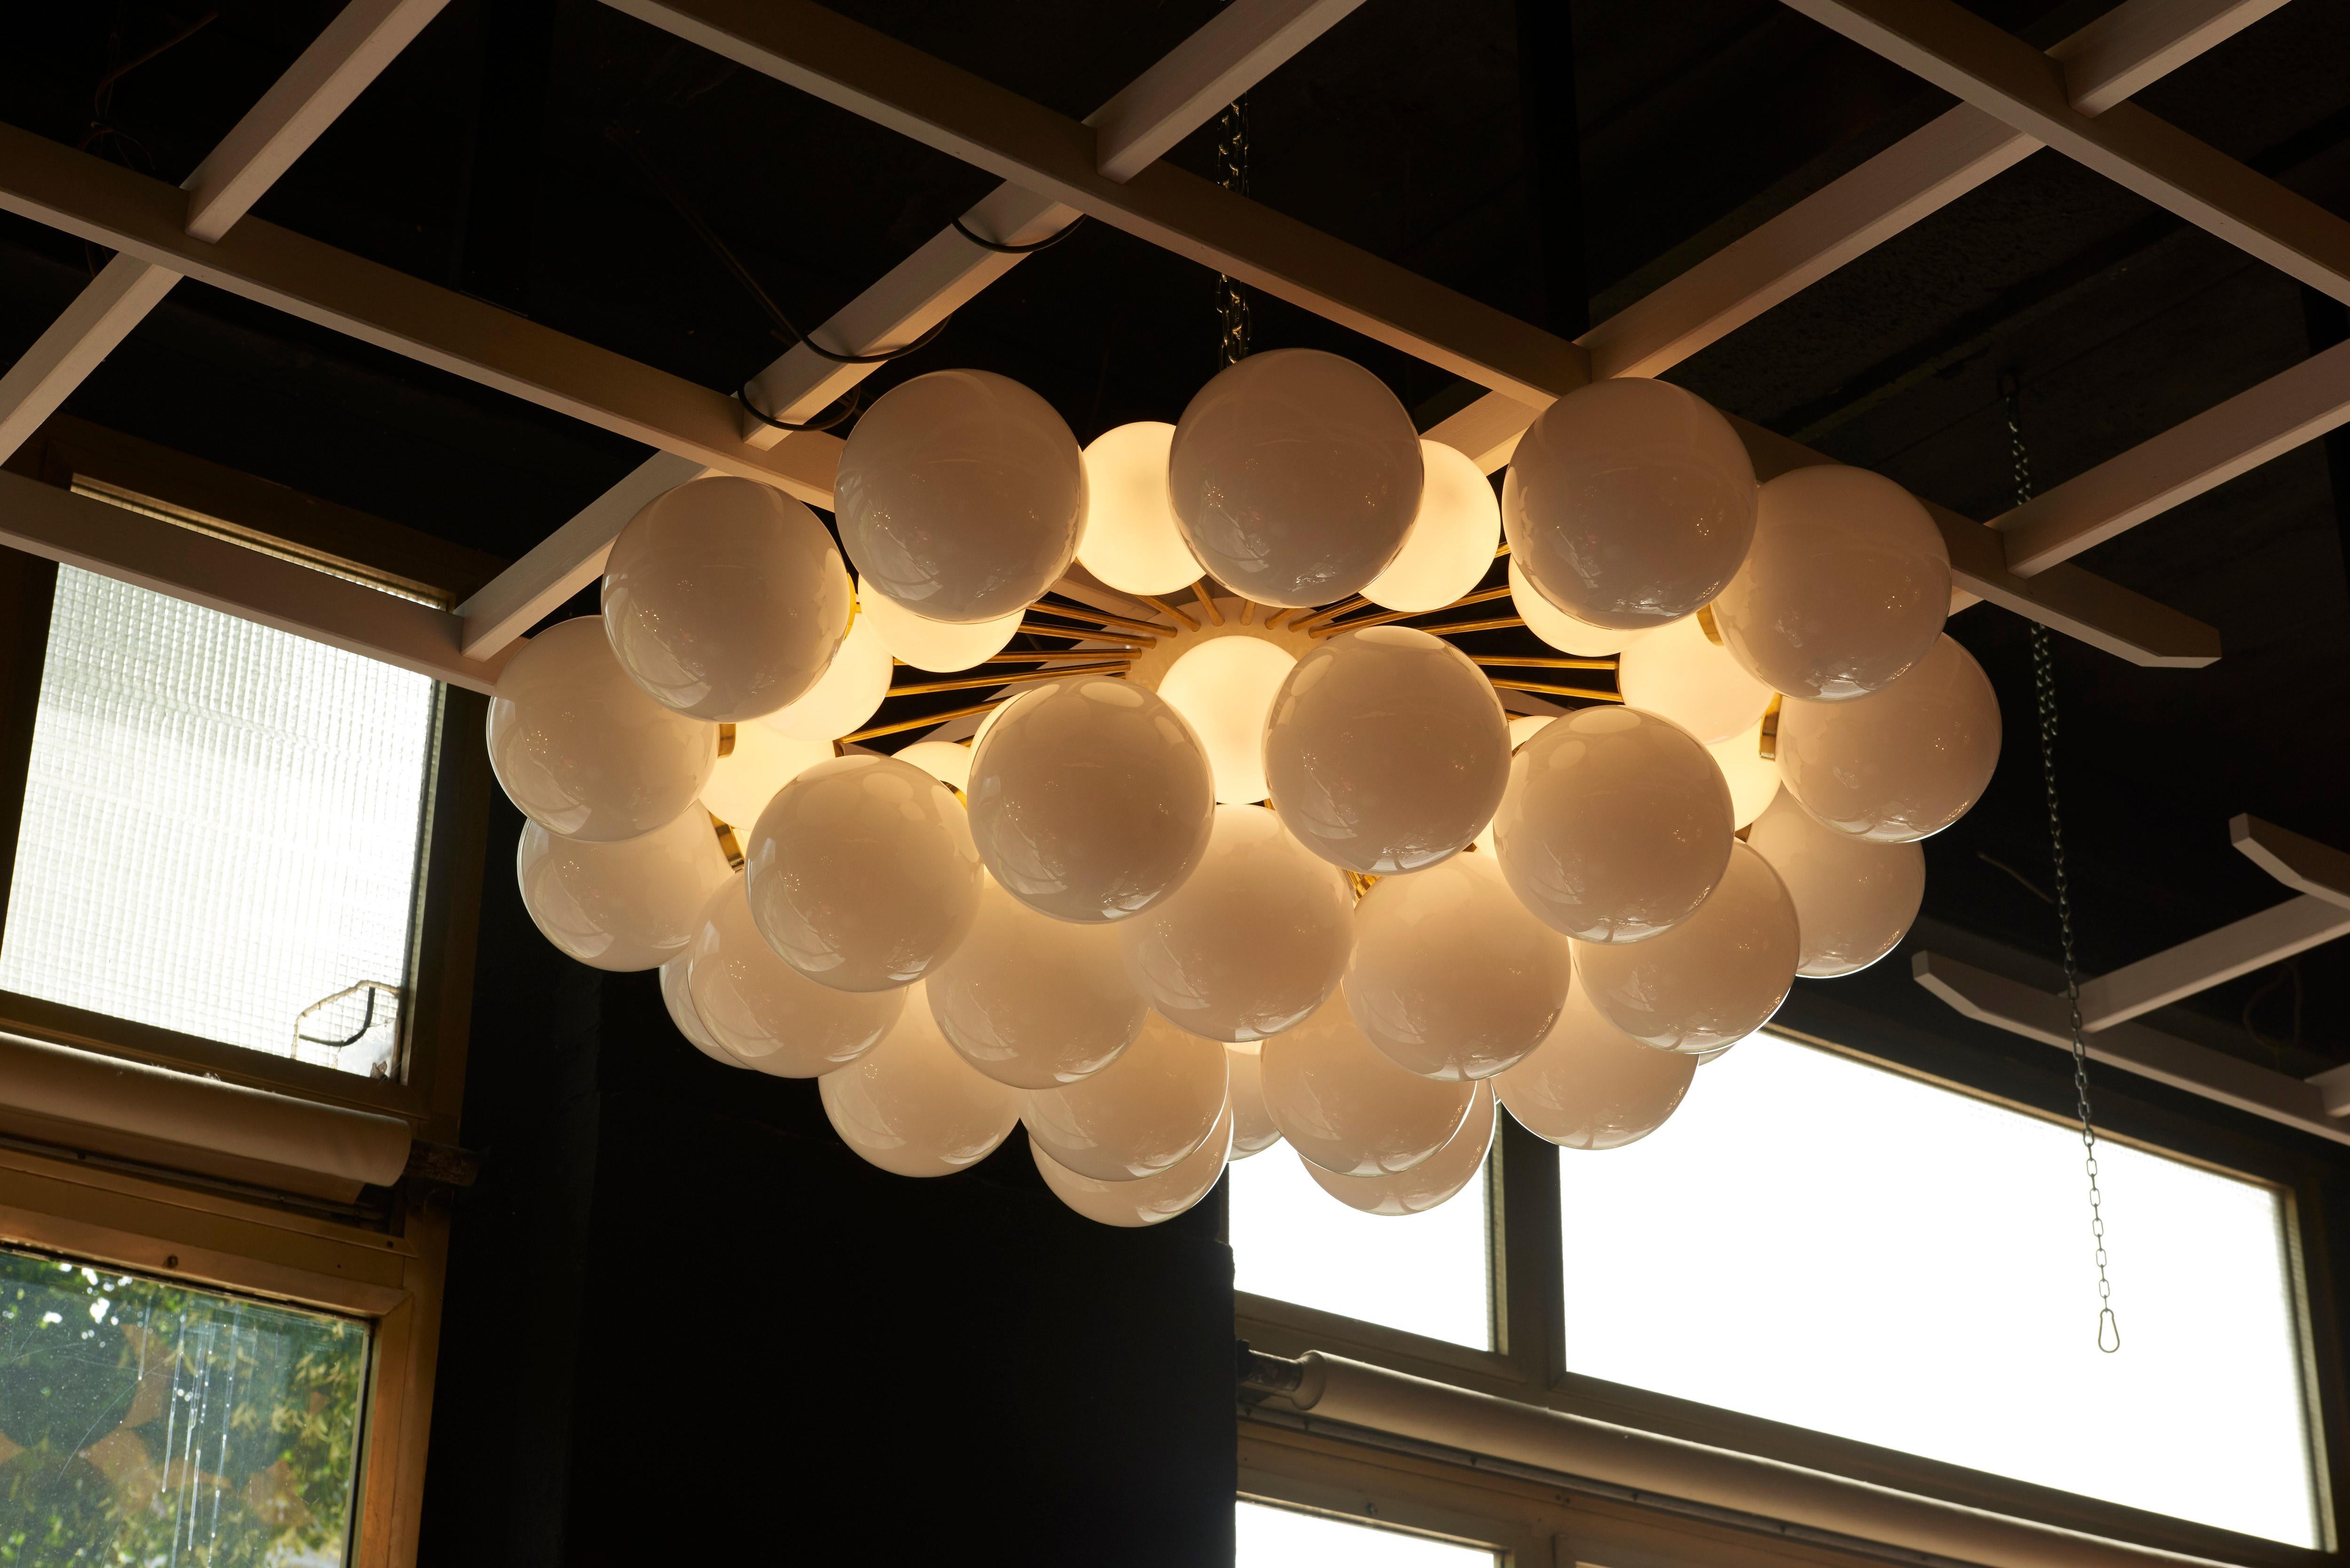 Monumental and impressing sputnik or cloud chandelier. The chandelier is a real eyecatcher in every room and it is in excellent condition. 24 x E14 bulbs.

To be on the safe side, the lamp should be checked locally by a specialist concerning local